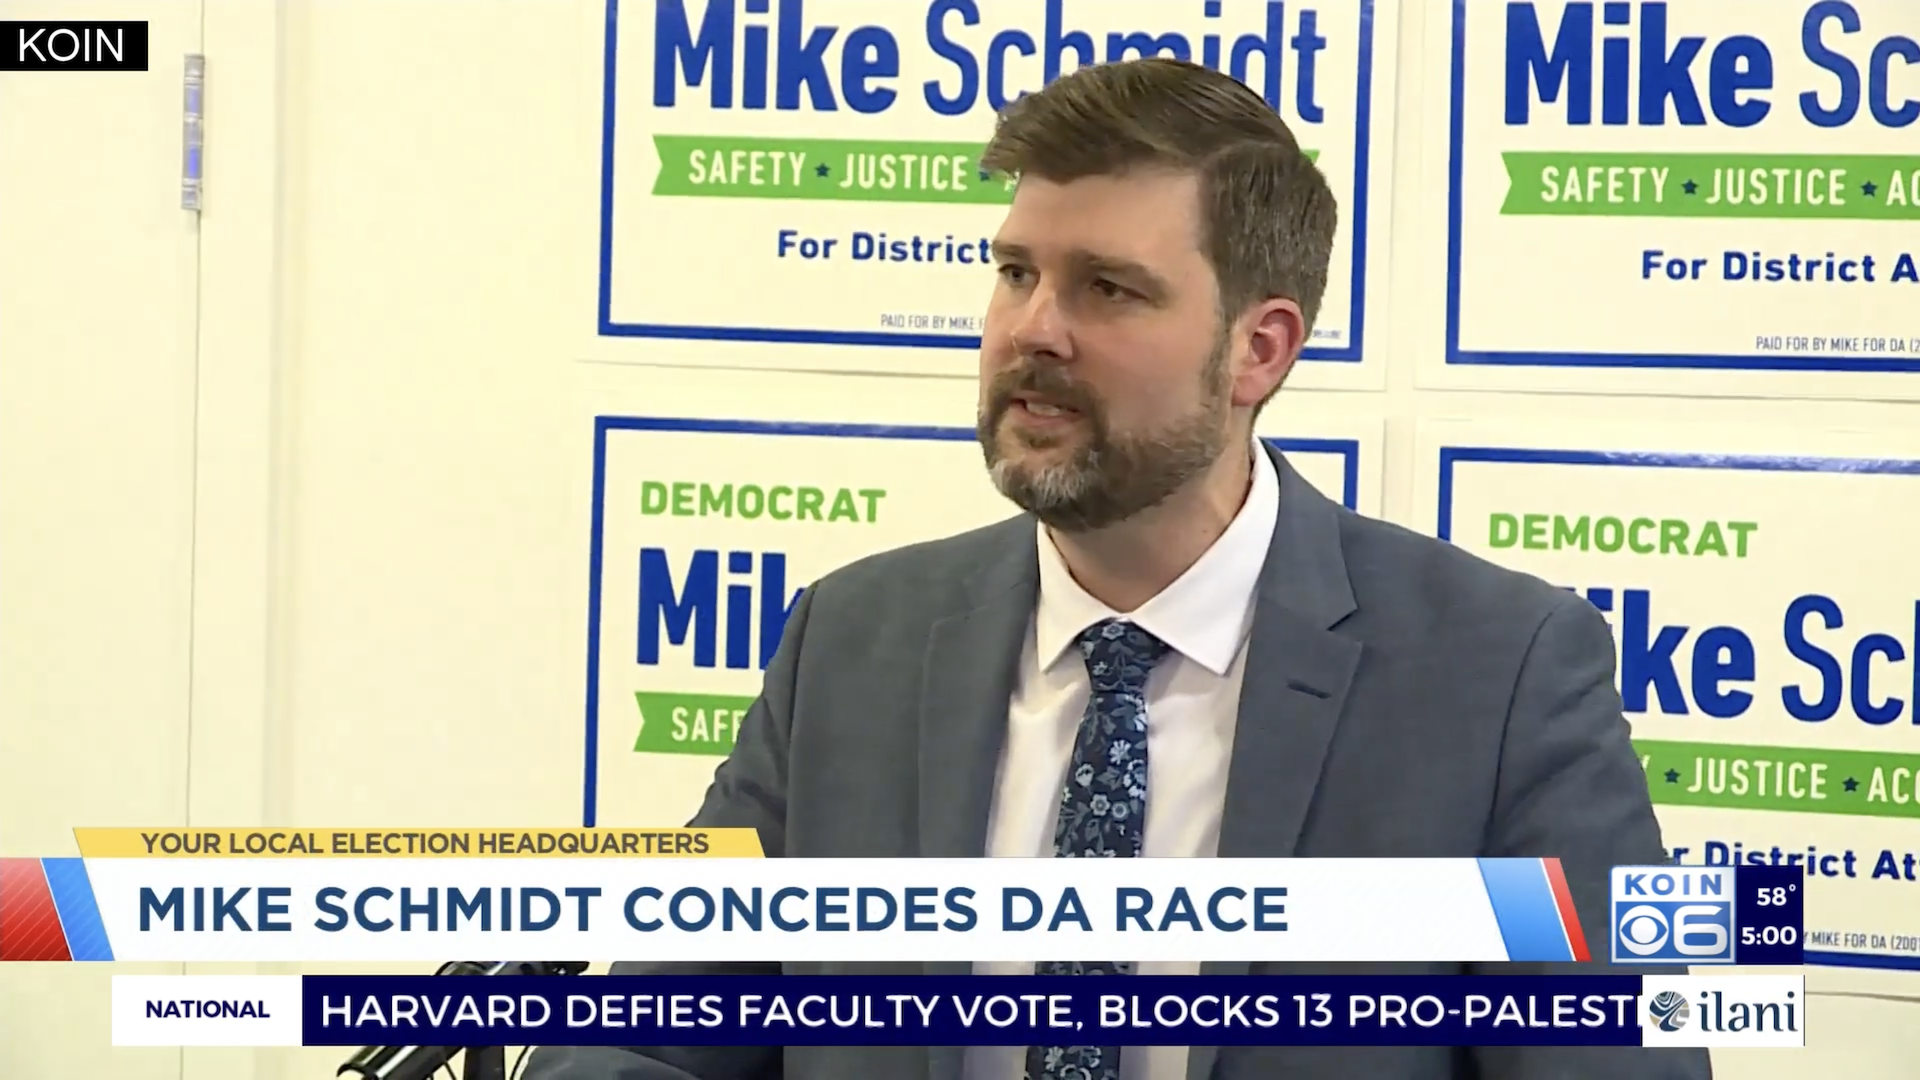 Soros-funded lawyer Mike Schmidt concedes Portland race after more than 20 hours of vote counting |  The Gateway expert